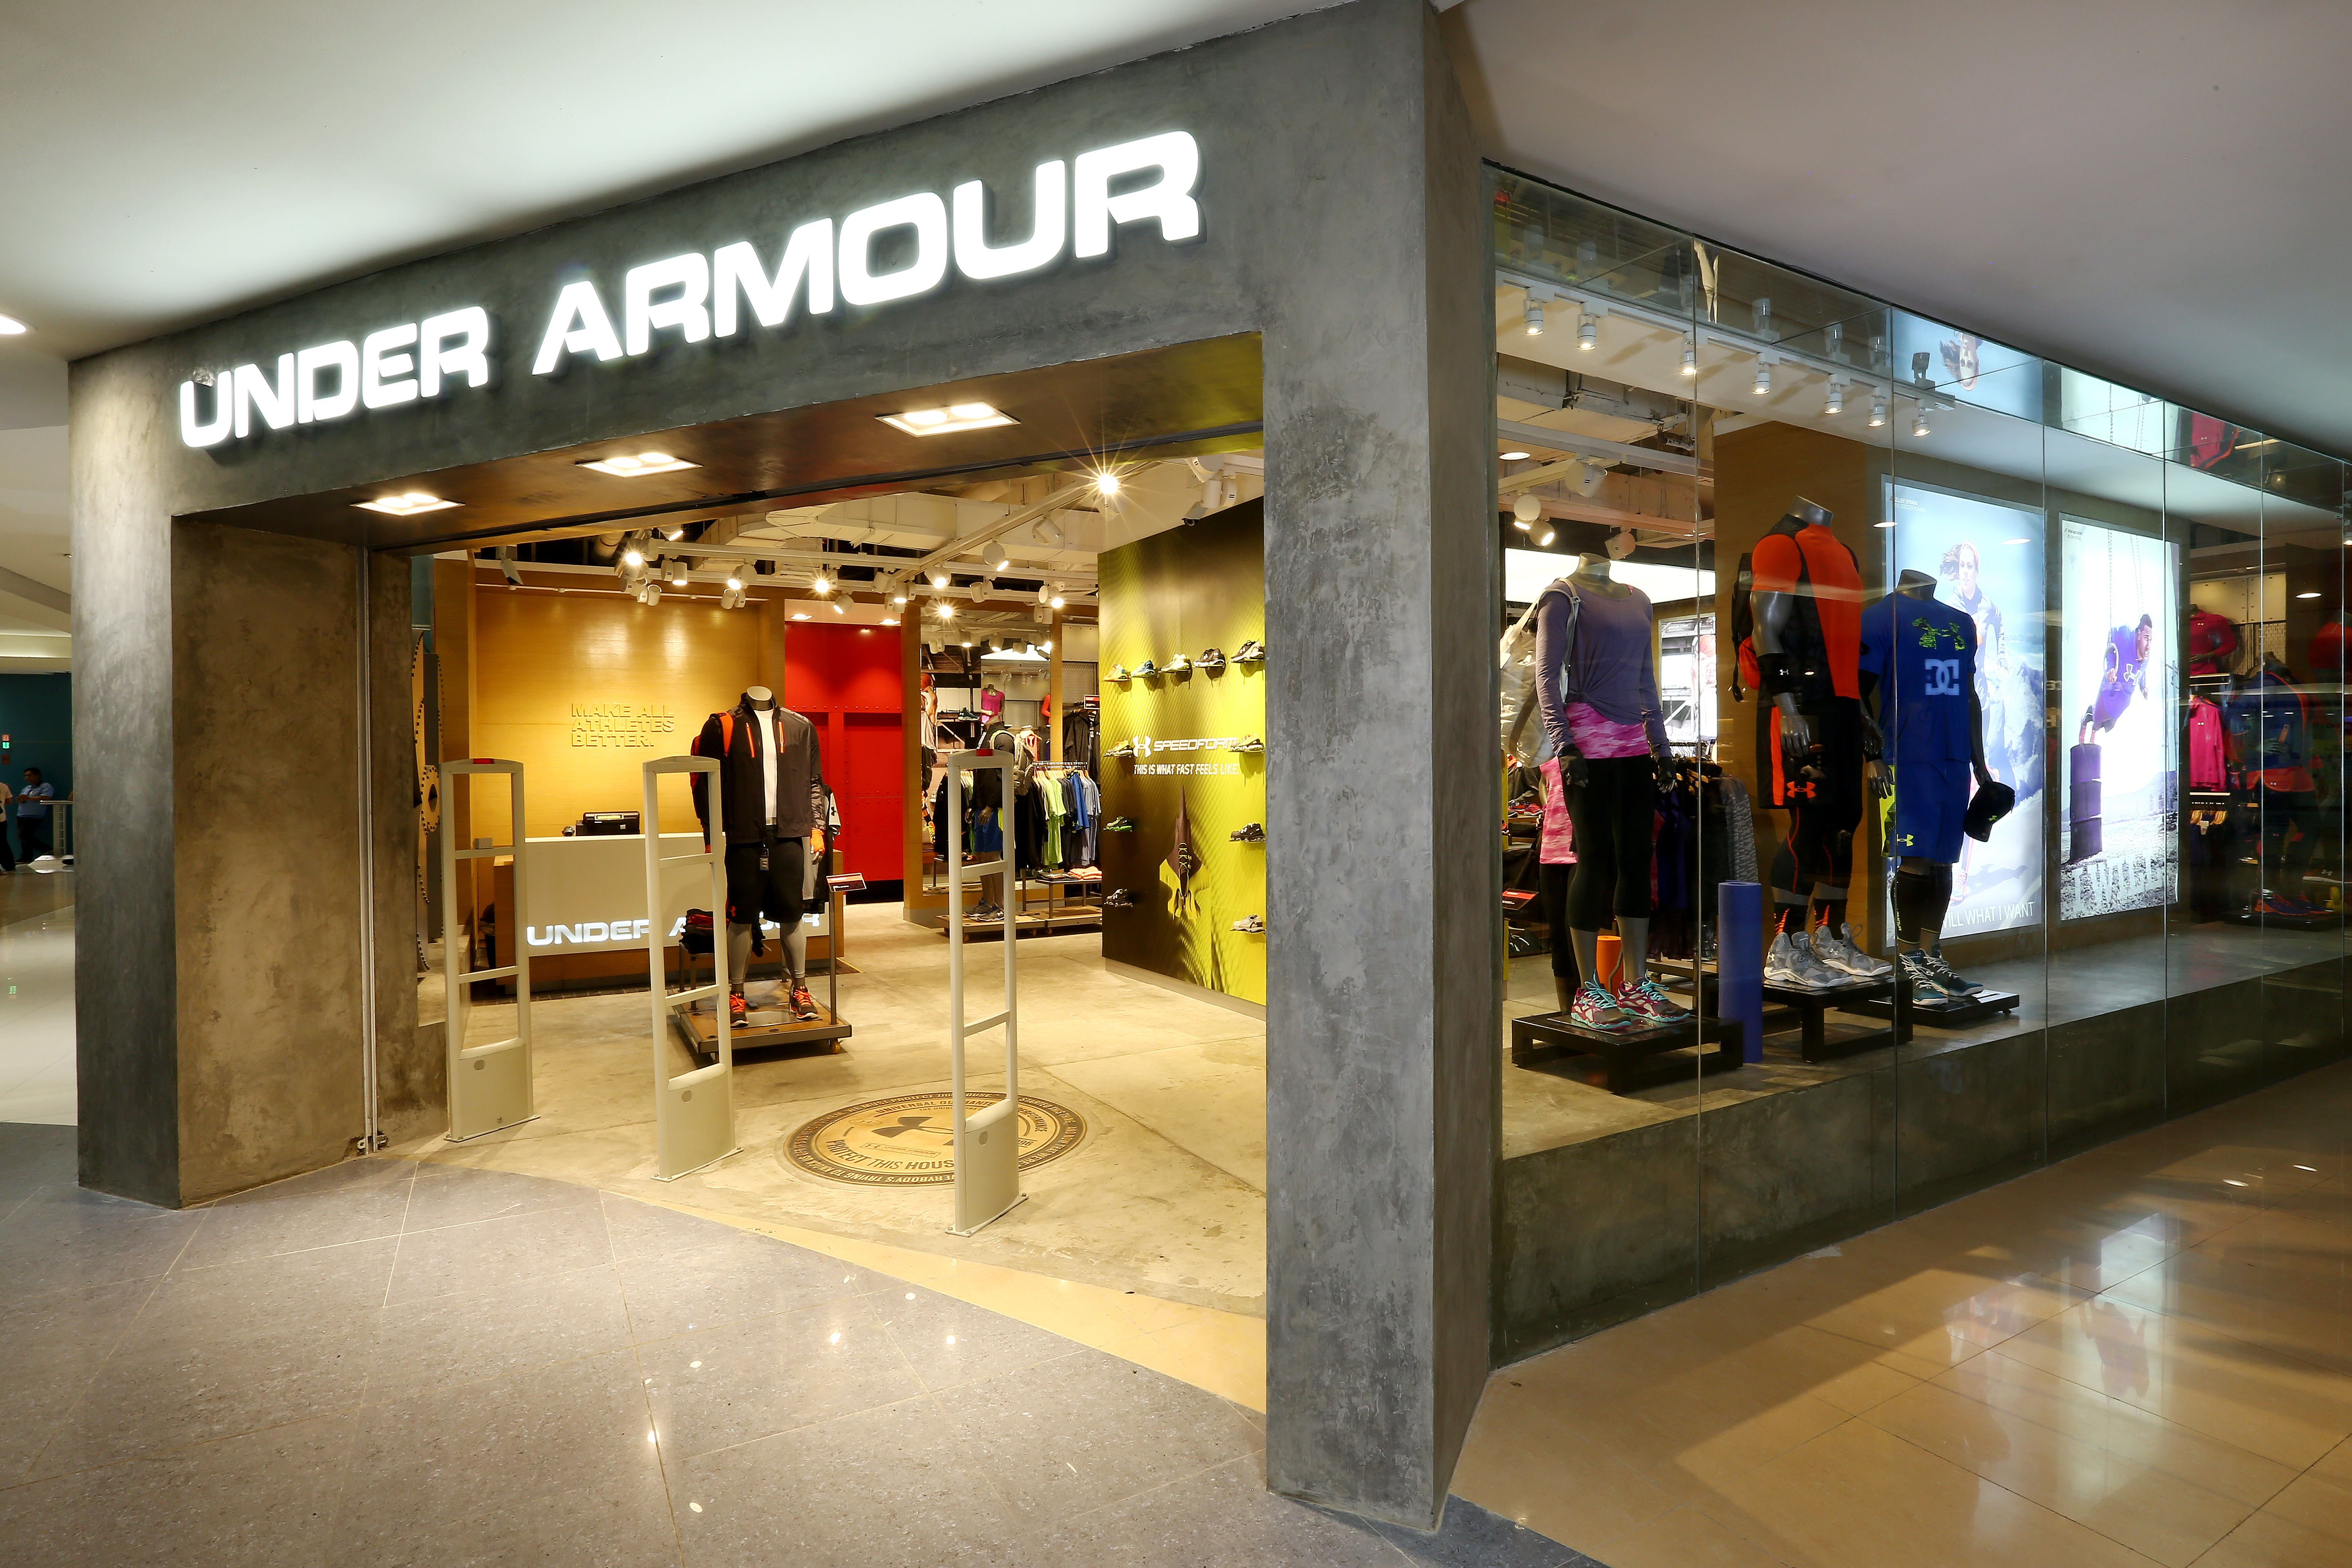 under armour megamall contact number